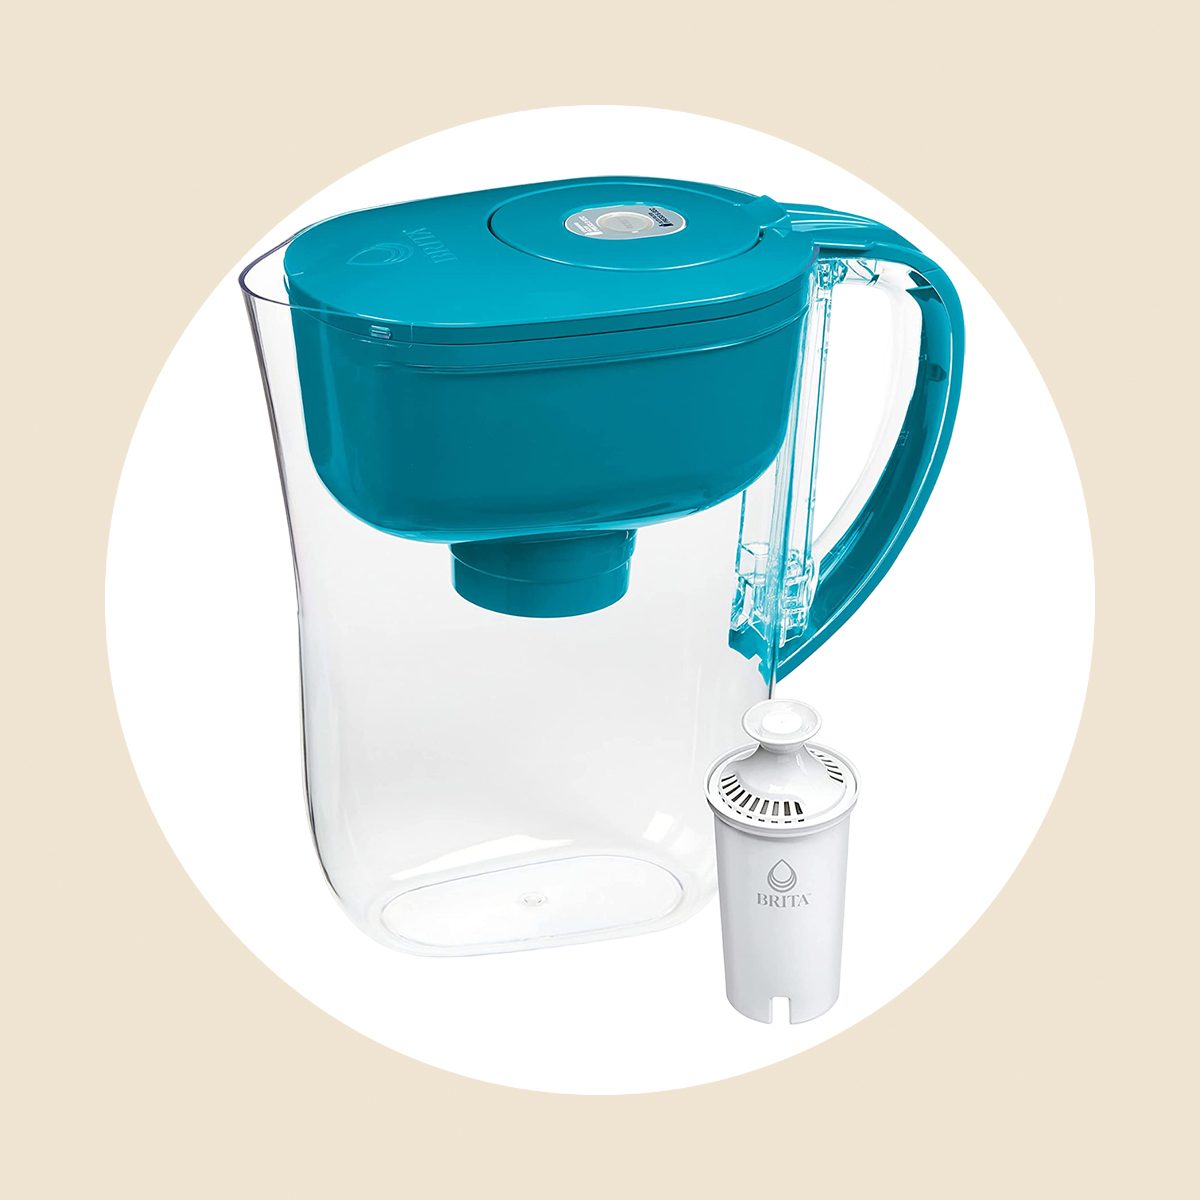 The 7 Best Water Filter Pitcher Models for 2023